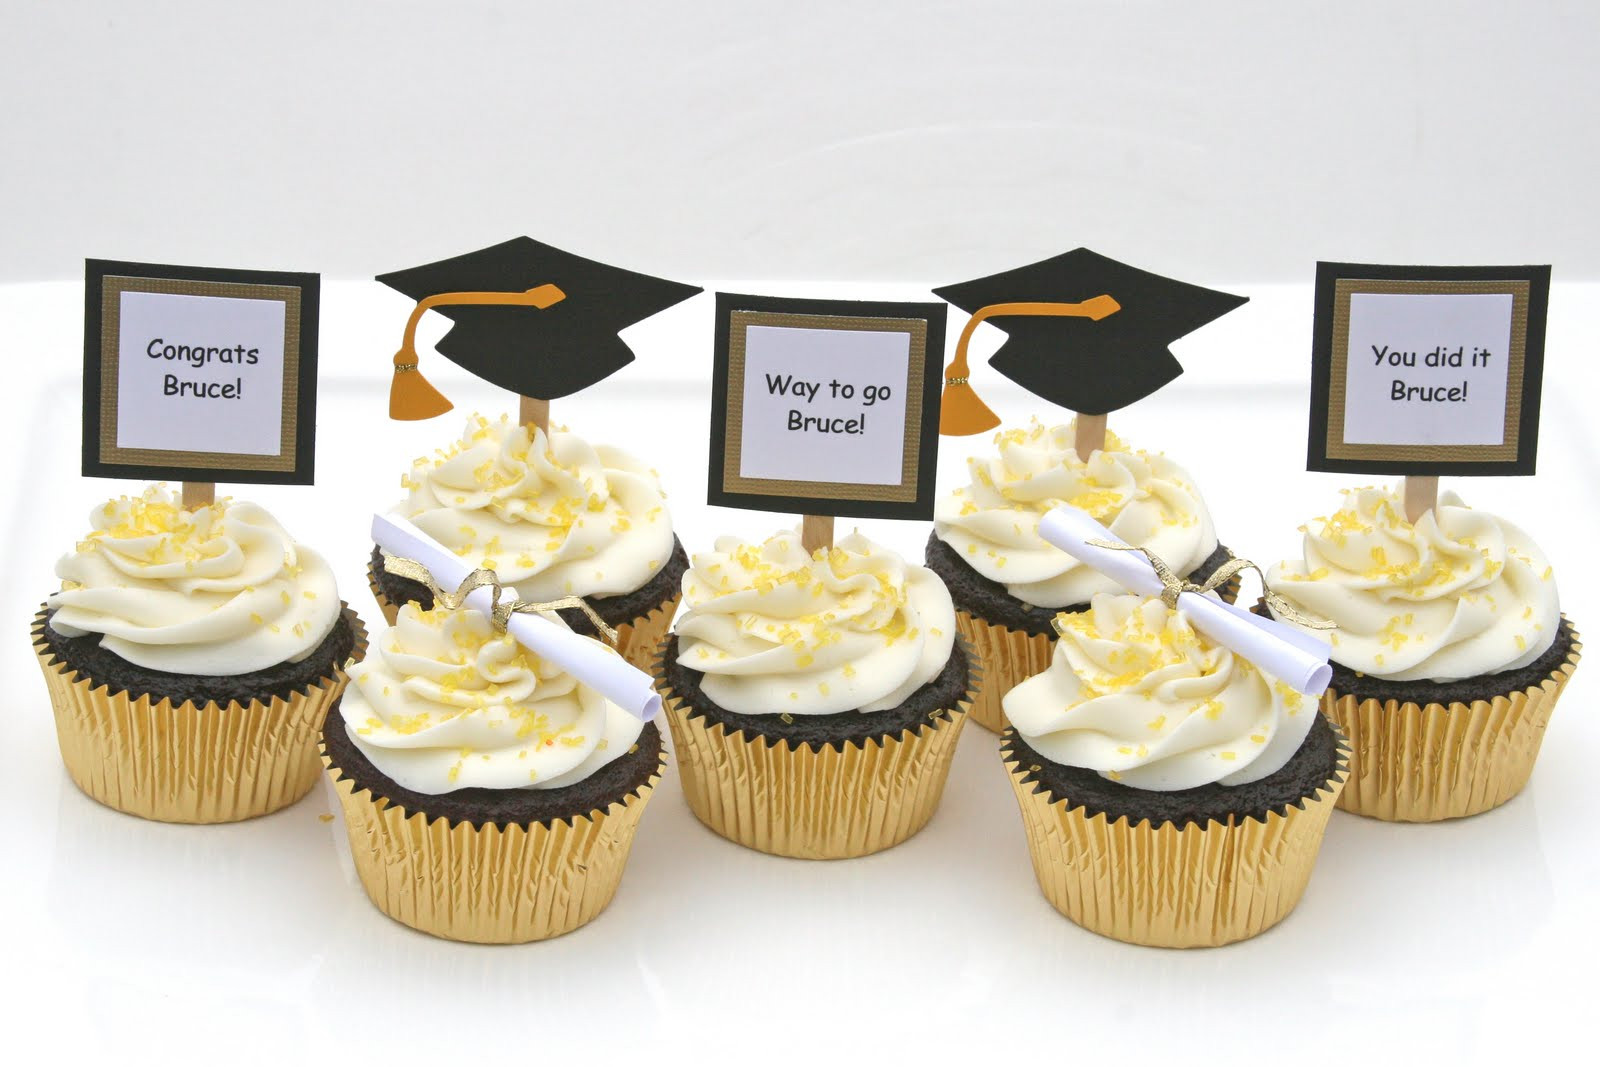 Graduation Cupcakes Decorating Ideas
 Graduation Cupcakes with Do it yourself Toppers – Glorious